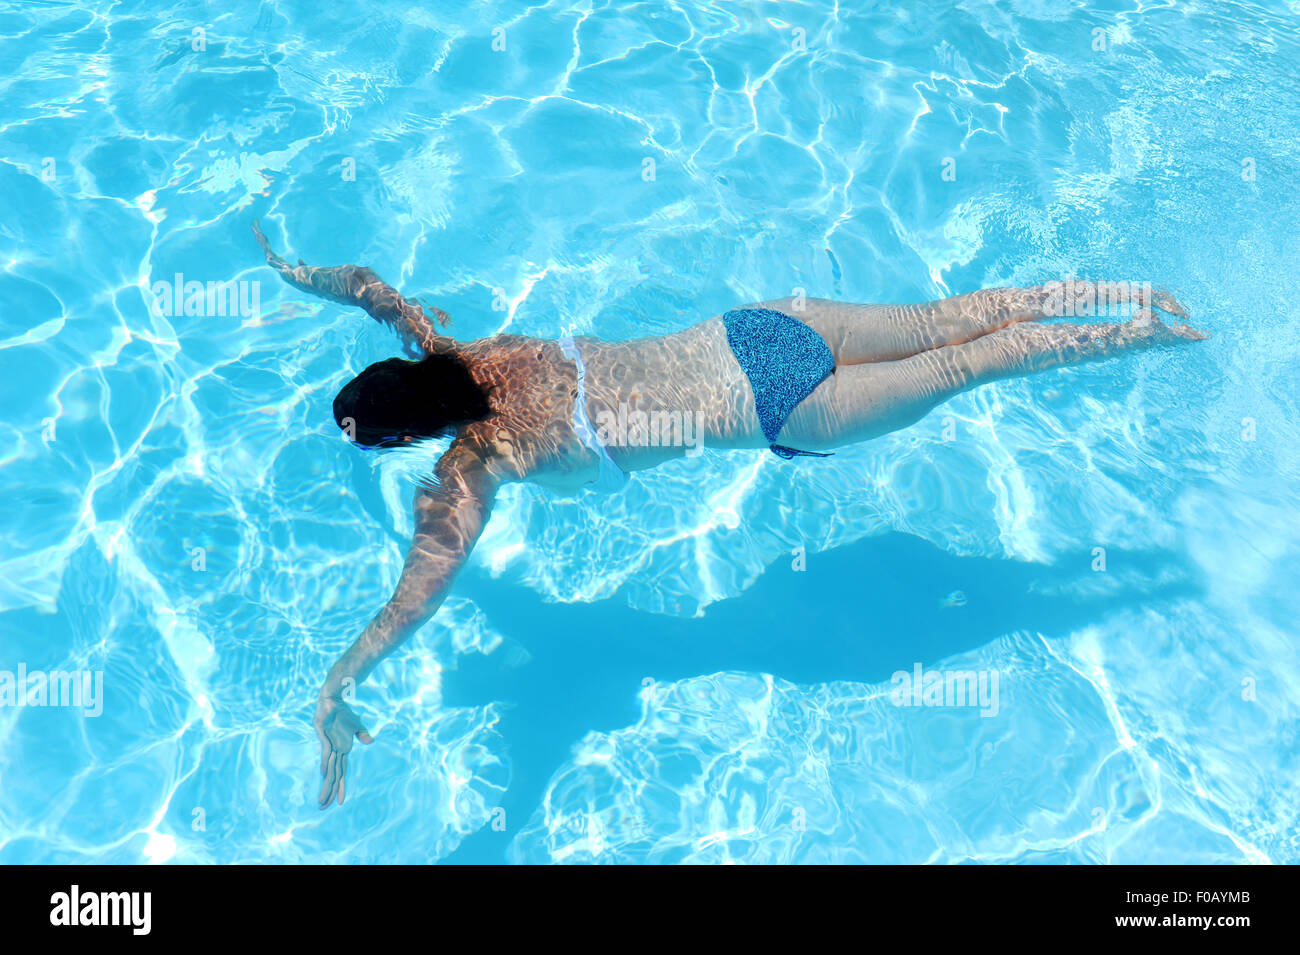 Swimming In Underwear: Over 16,123 Royalty-Free Licensable Stock